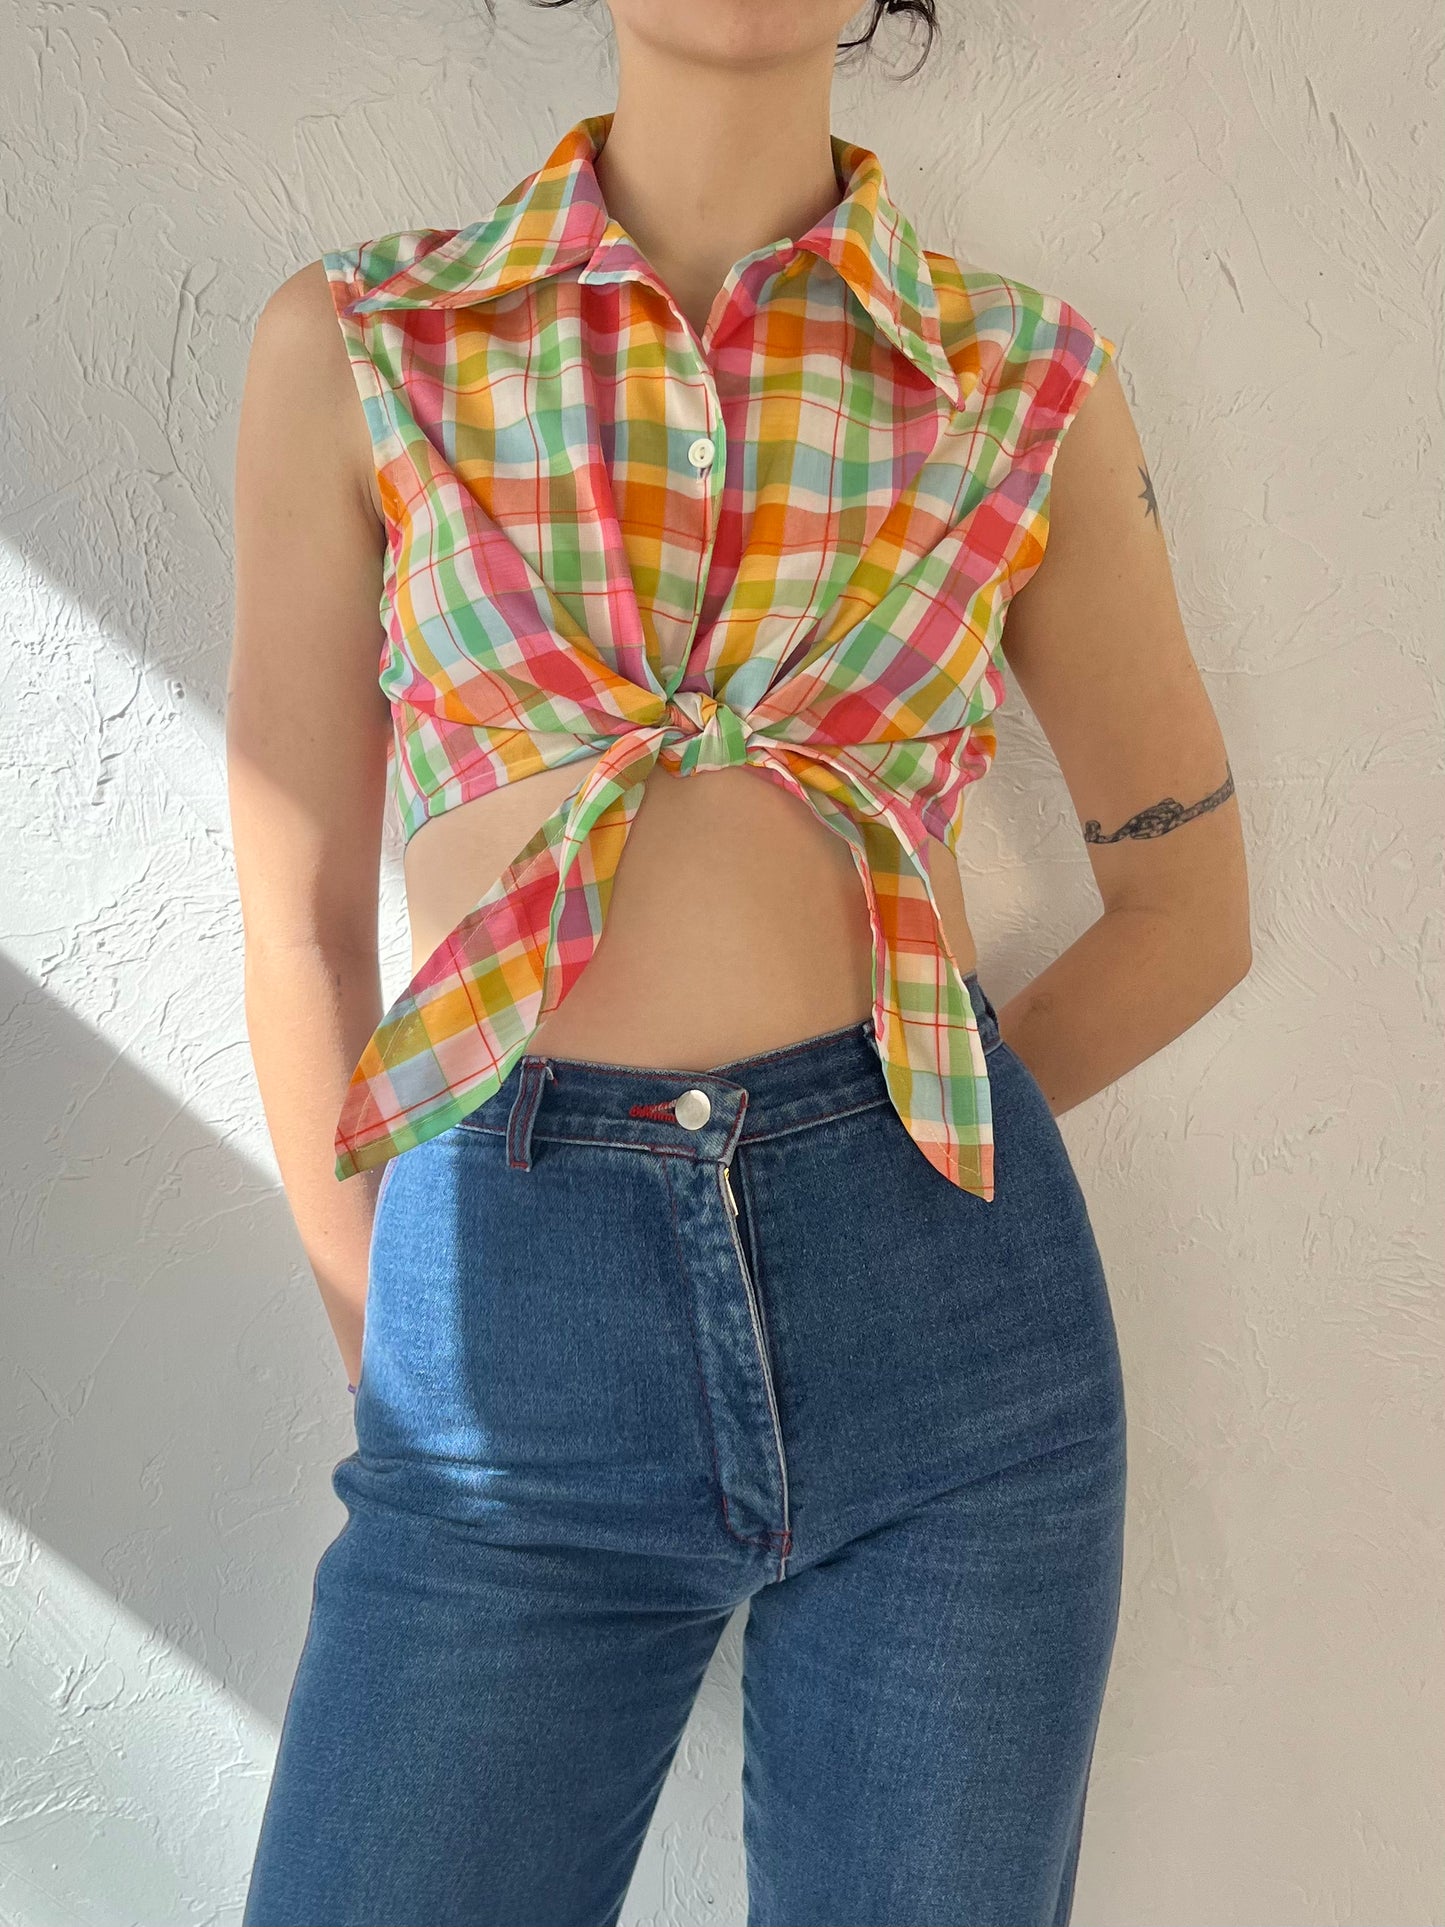 70s 'Fritzy' Plaid Tie Up Crop Top / Small